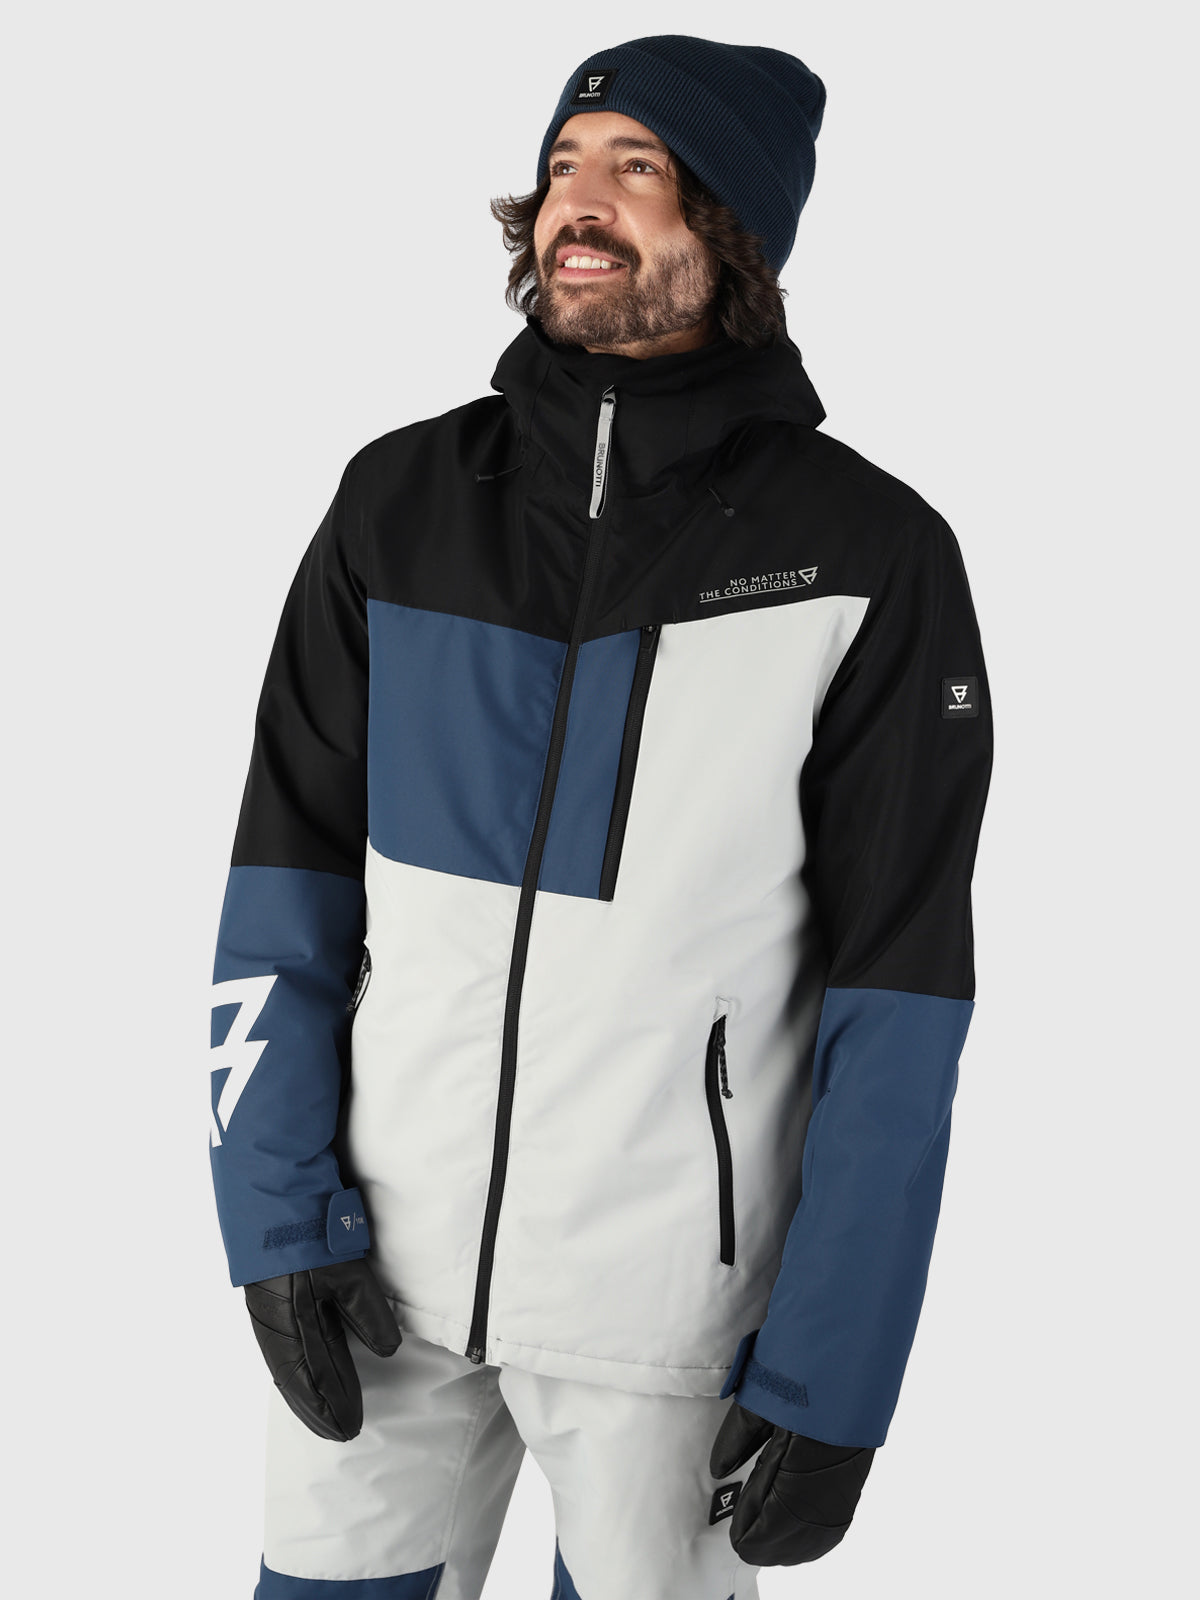 for Men, Women, and Ski performance Snow High Brunotti Kids and Jackets: Jackets Snowboard